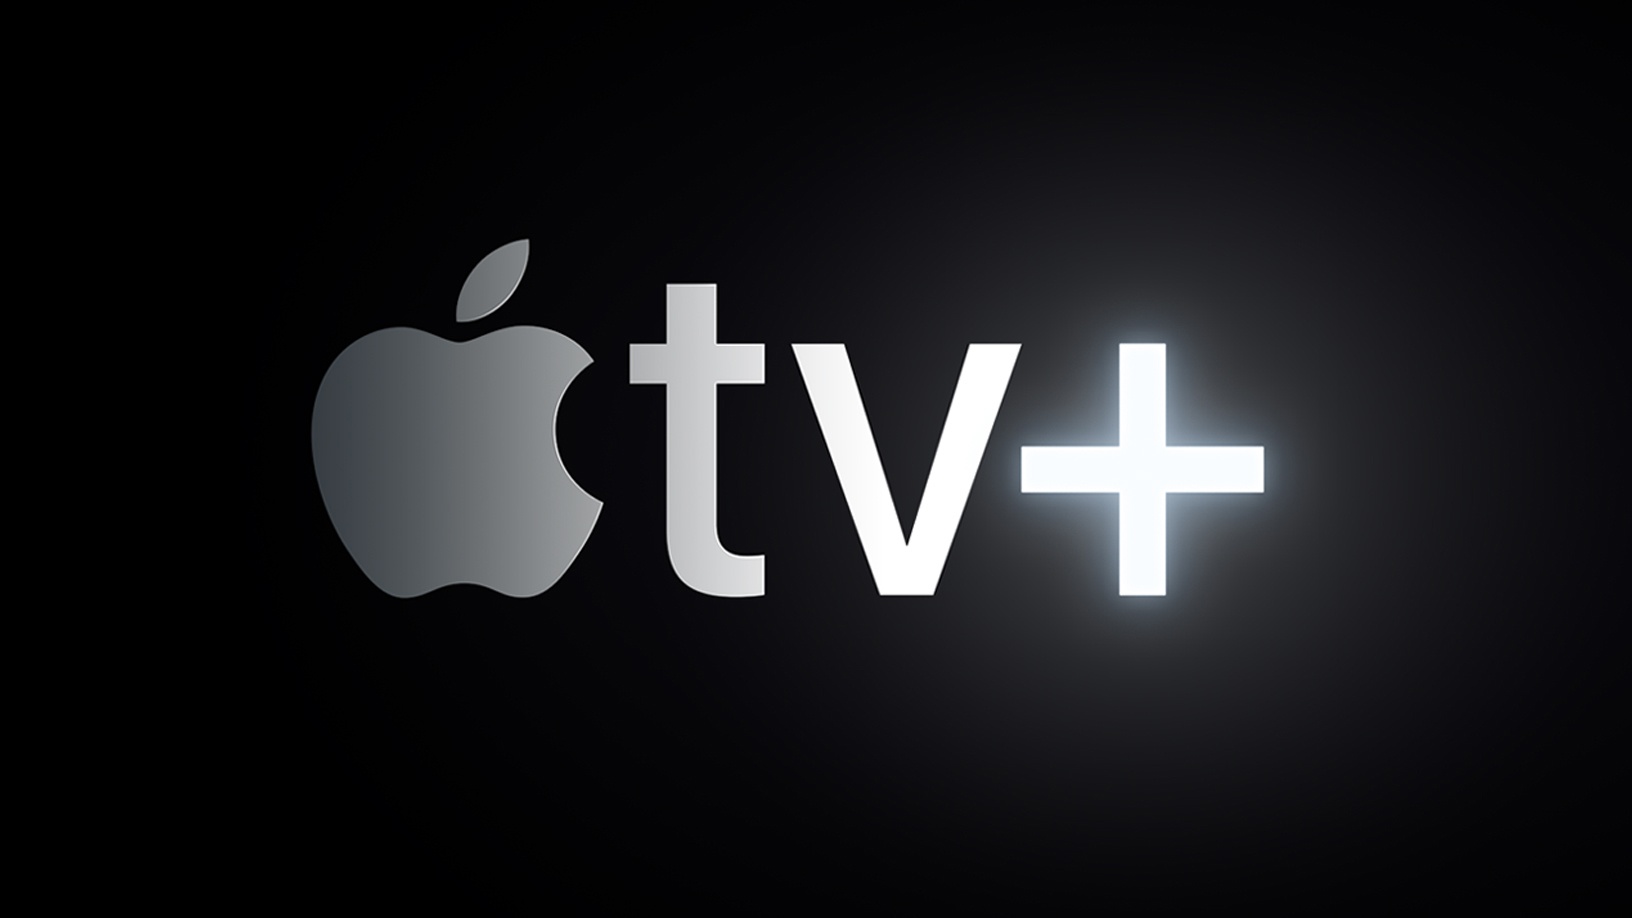 apple-tv+-year-long-free-trial-offer-will-end-in-july